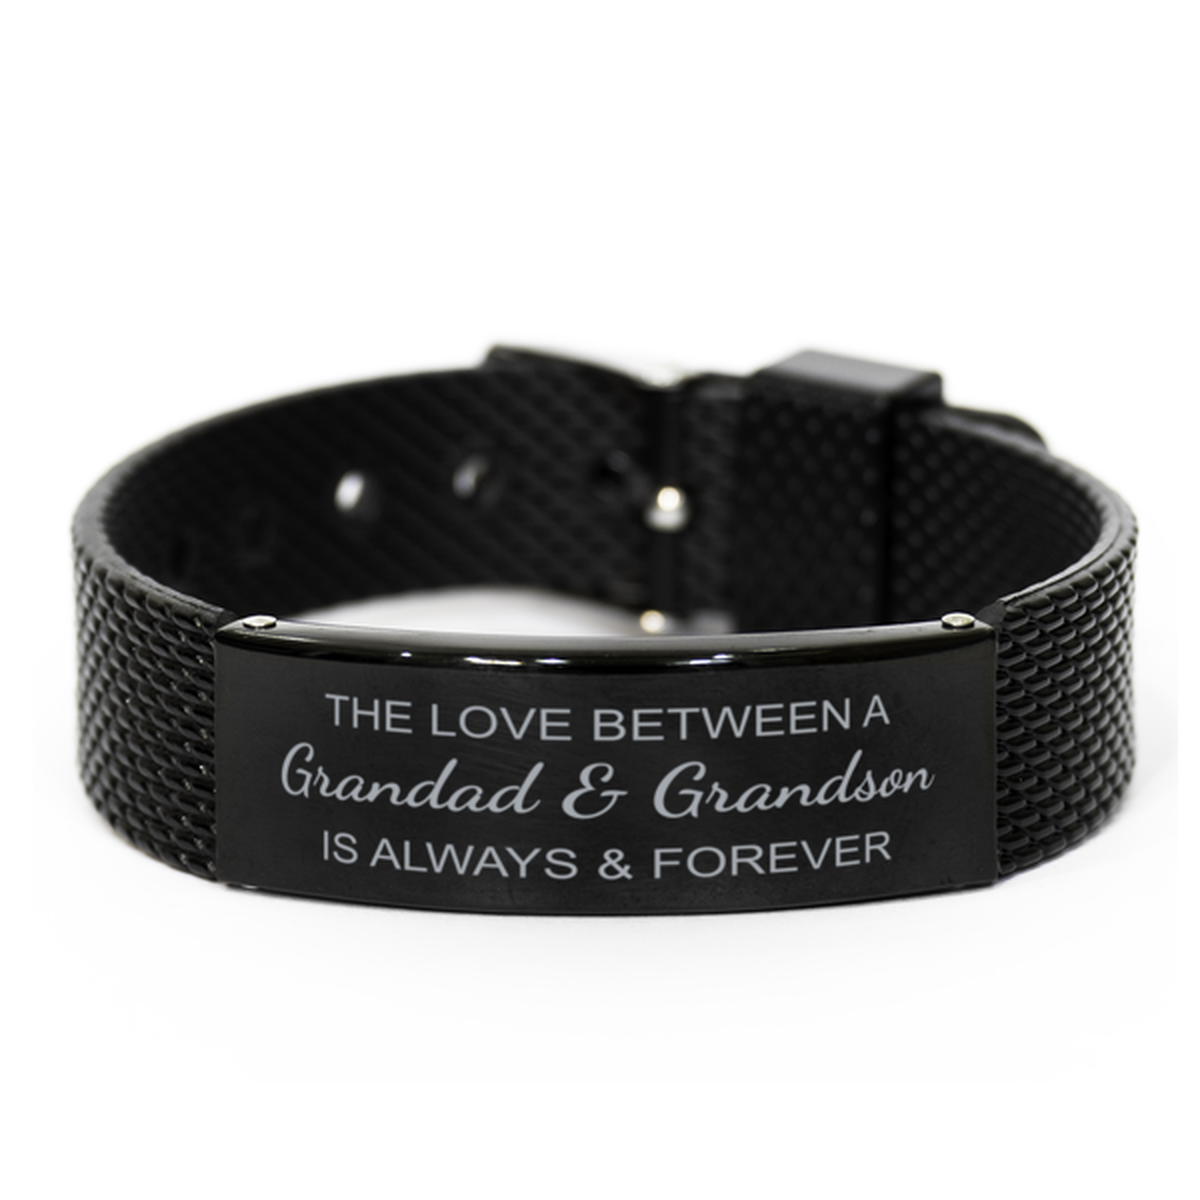 The Love Between a Grandad and Grandson is Always and Forever Bracelet, Grandad Grandson Bracelet, Black Stainless Steel Leather Bracelet, Christmas.